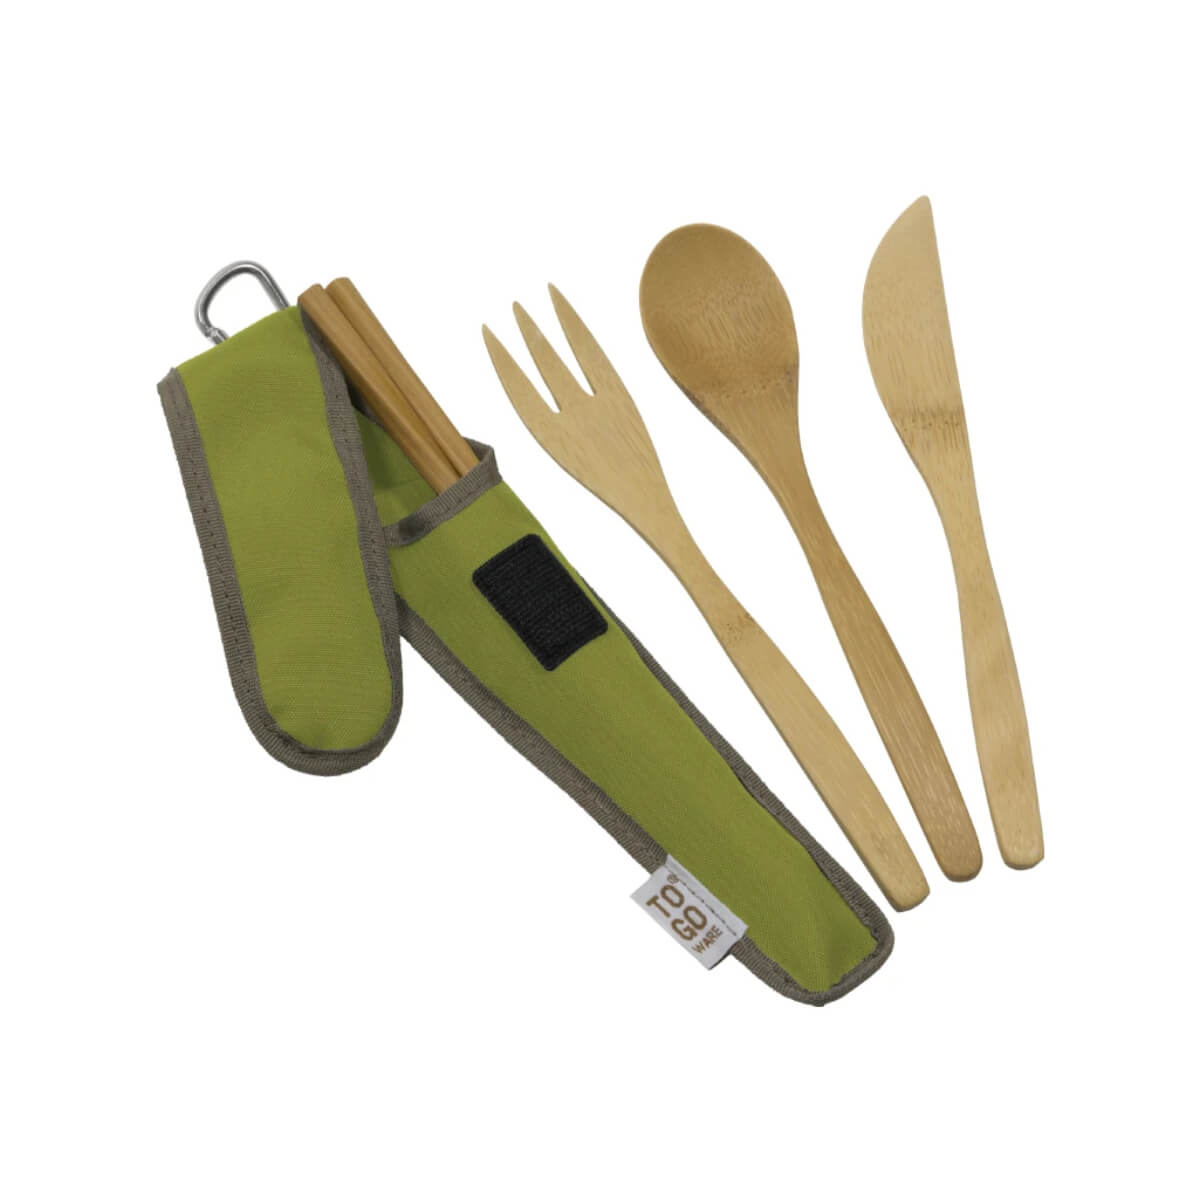 Bamboo cutlery for camping